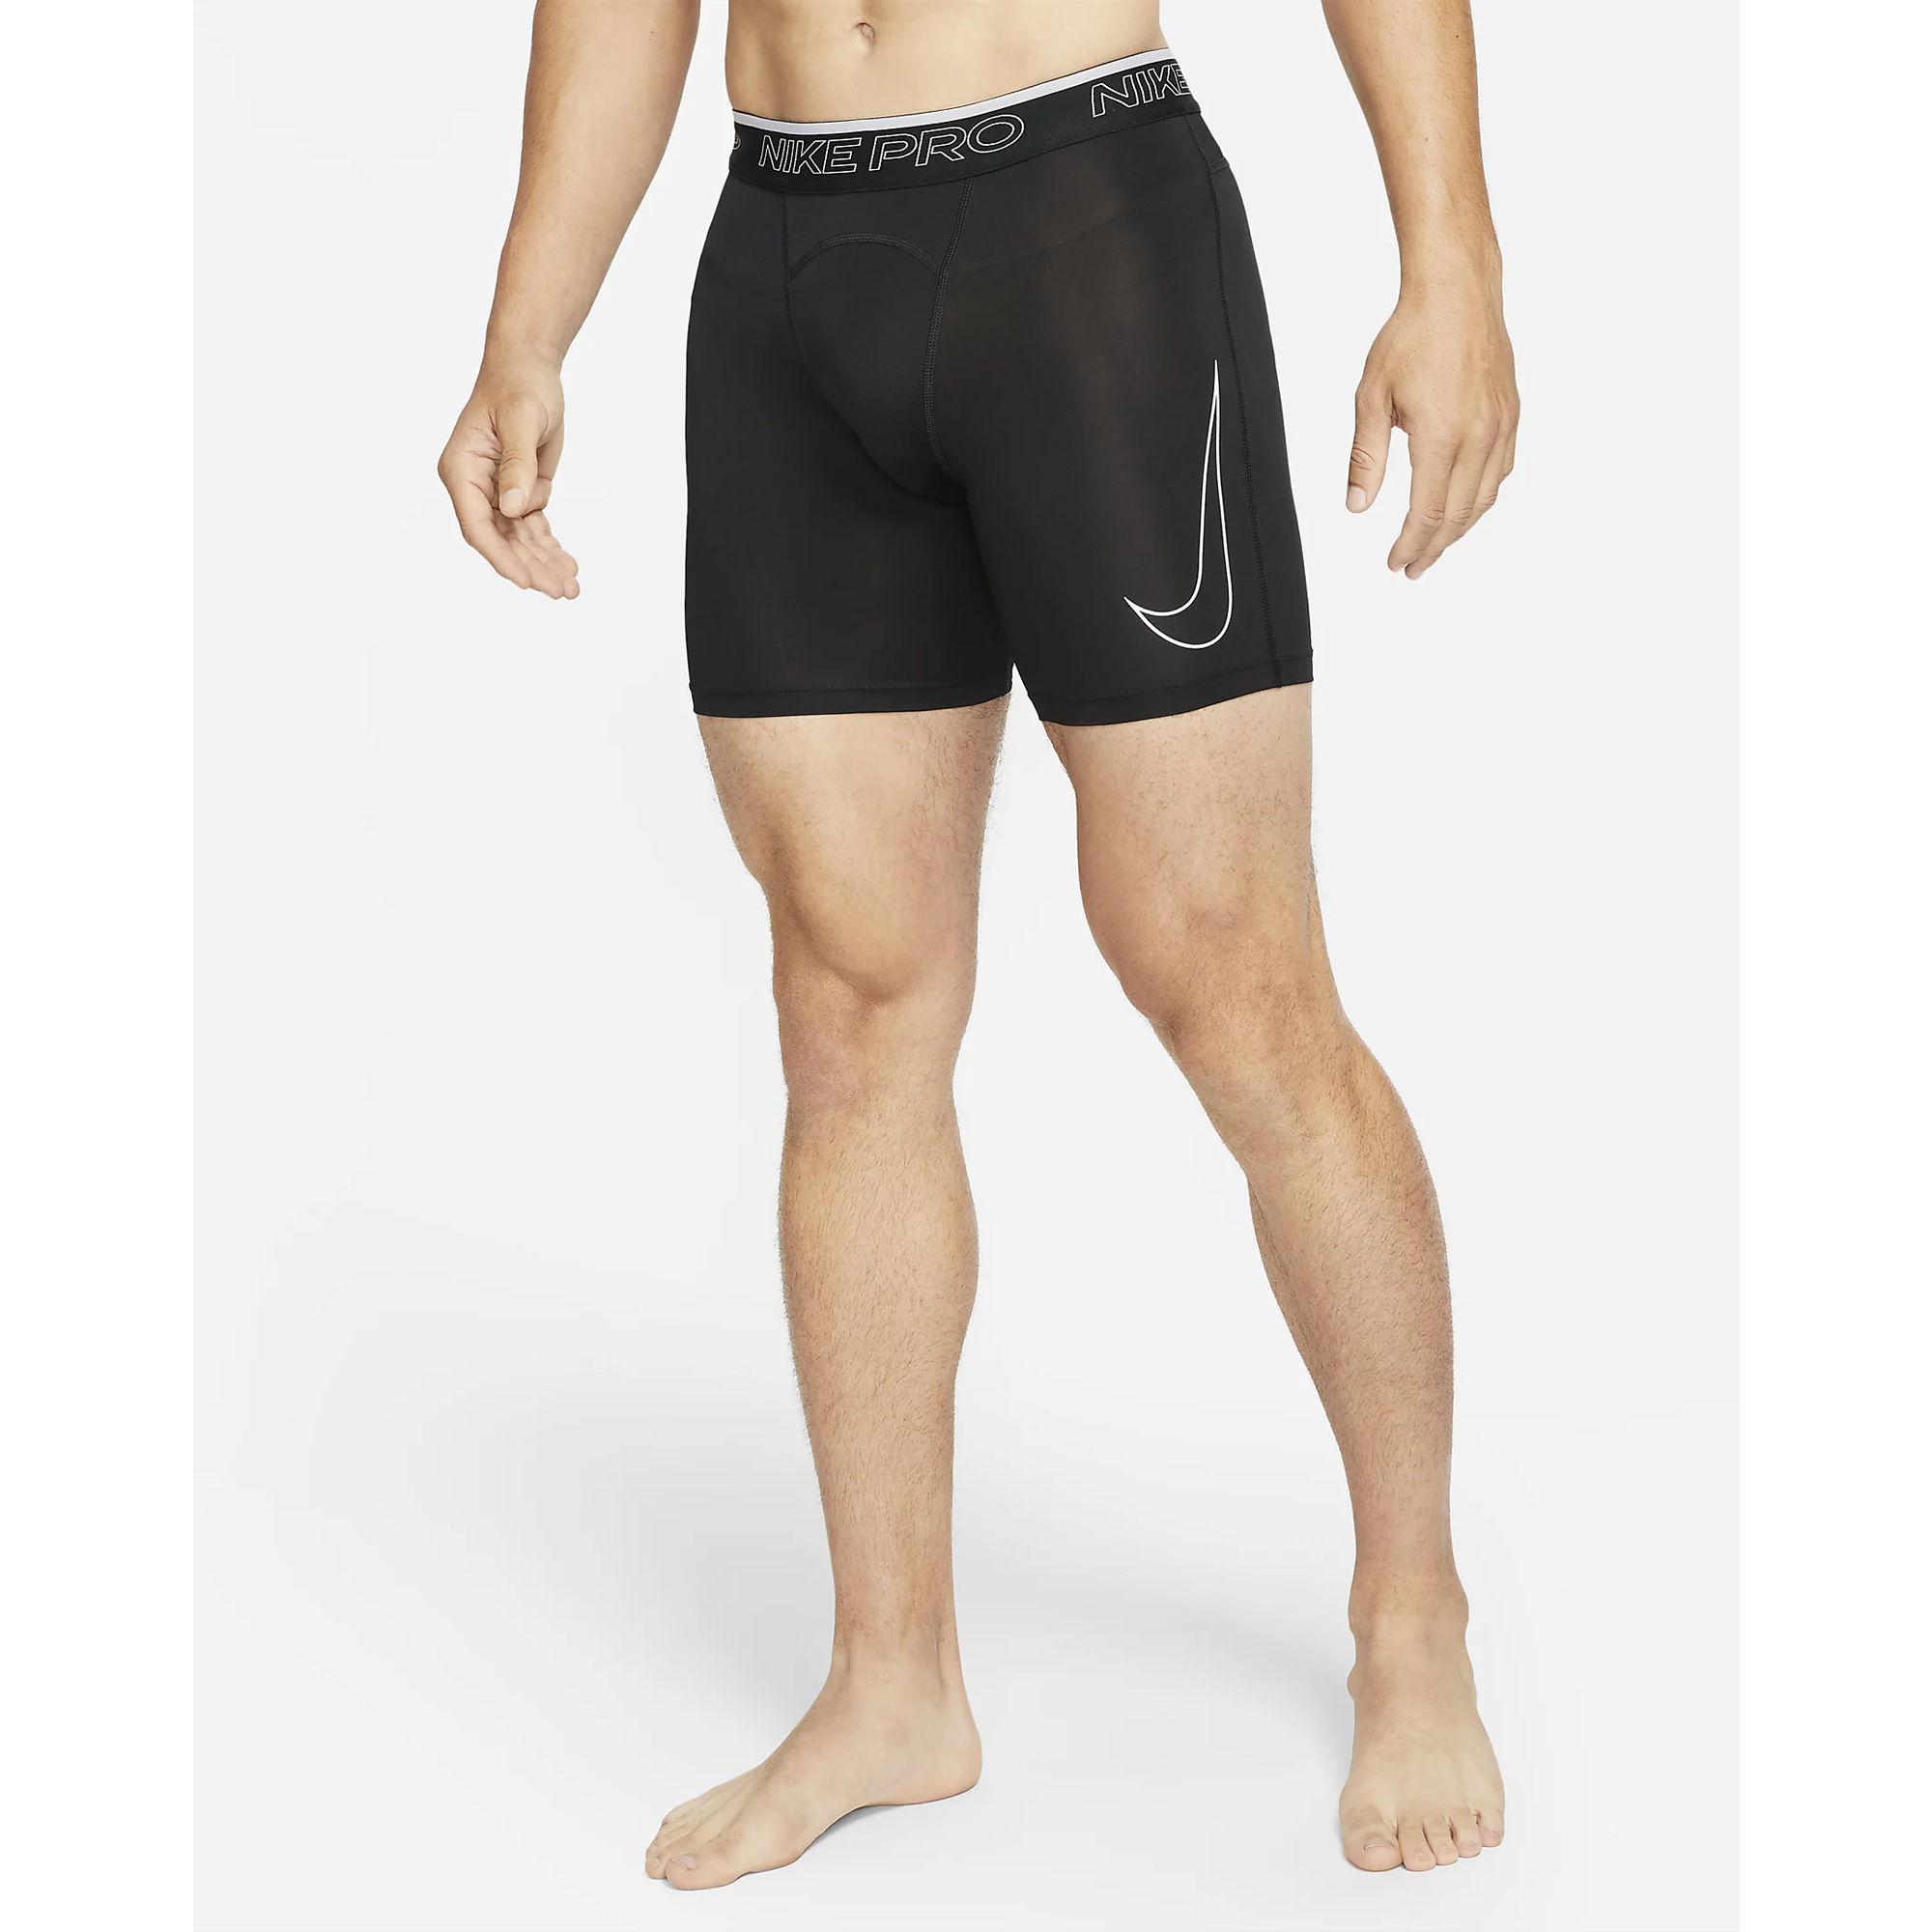 Youth Size USA Classic Compression Short | Unpadded Black Spandex Shorts  for Kids